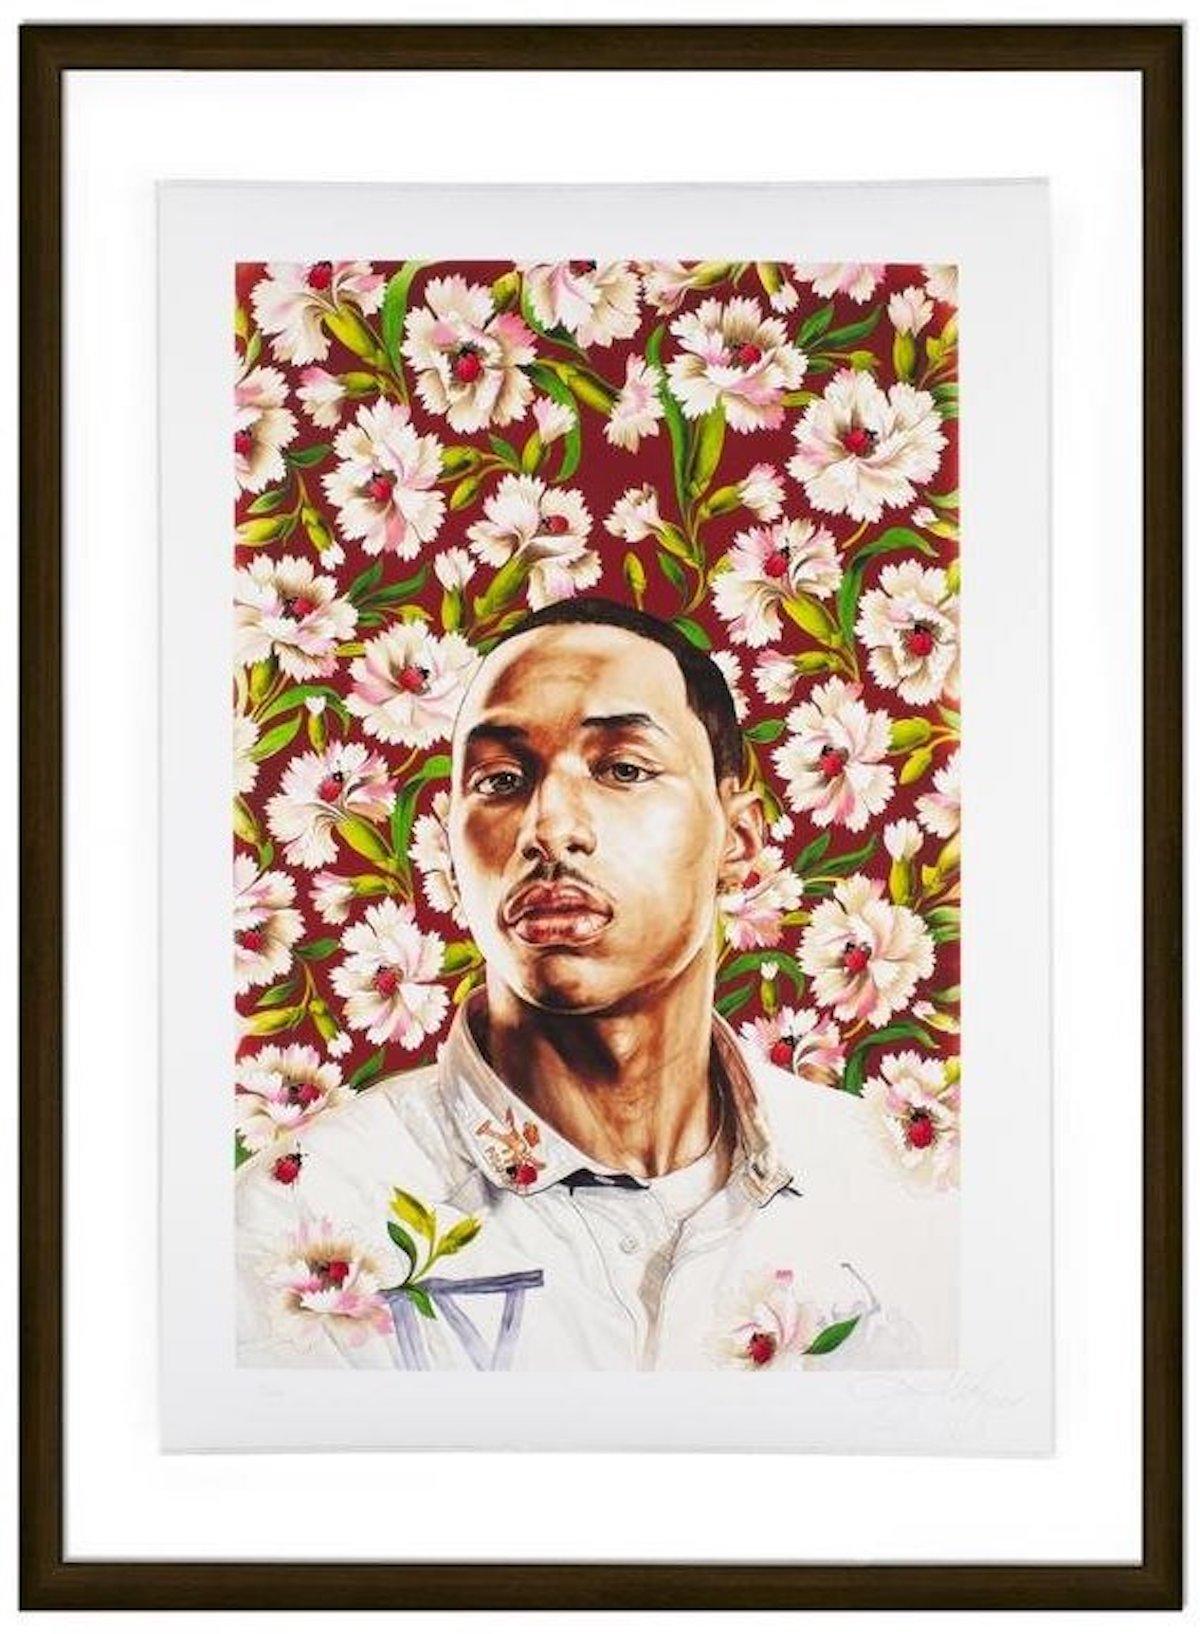 Kehinde Wiley's 'Sharrod Hosten Study III, 2020' is part of a limited edition print of only 30 copies. This piece was printed using archival ink on paper, signed and dated 'Kehinde Wiley 2020' Ed. 19/30 in artist's frame. 

---

Partnered with Sean